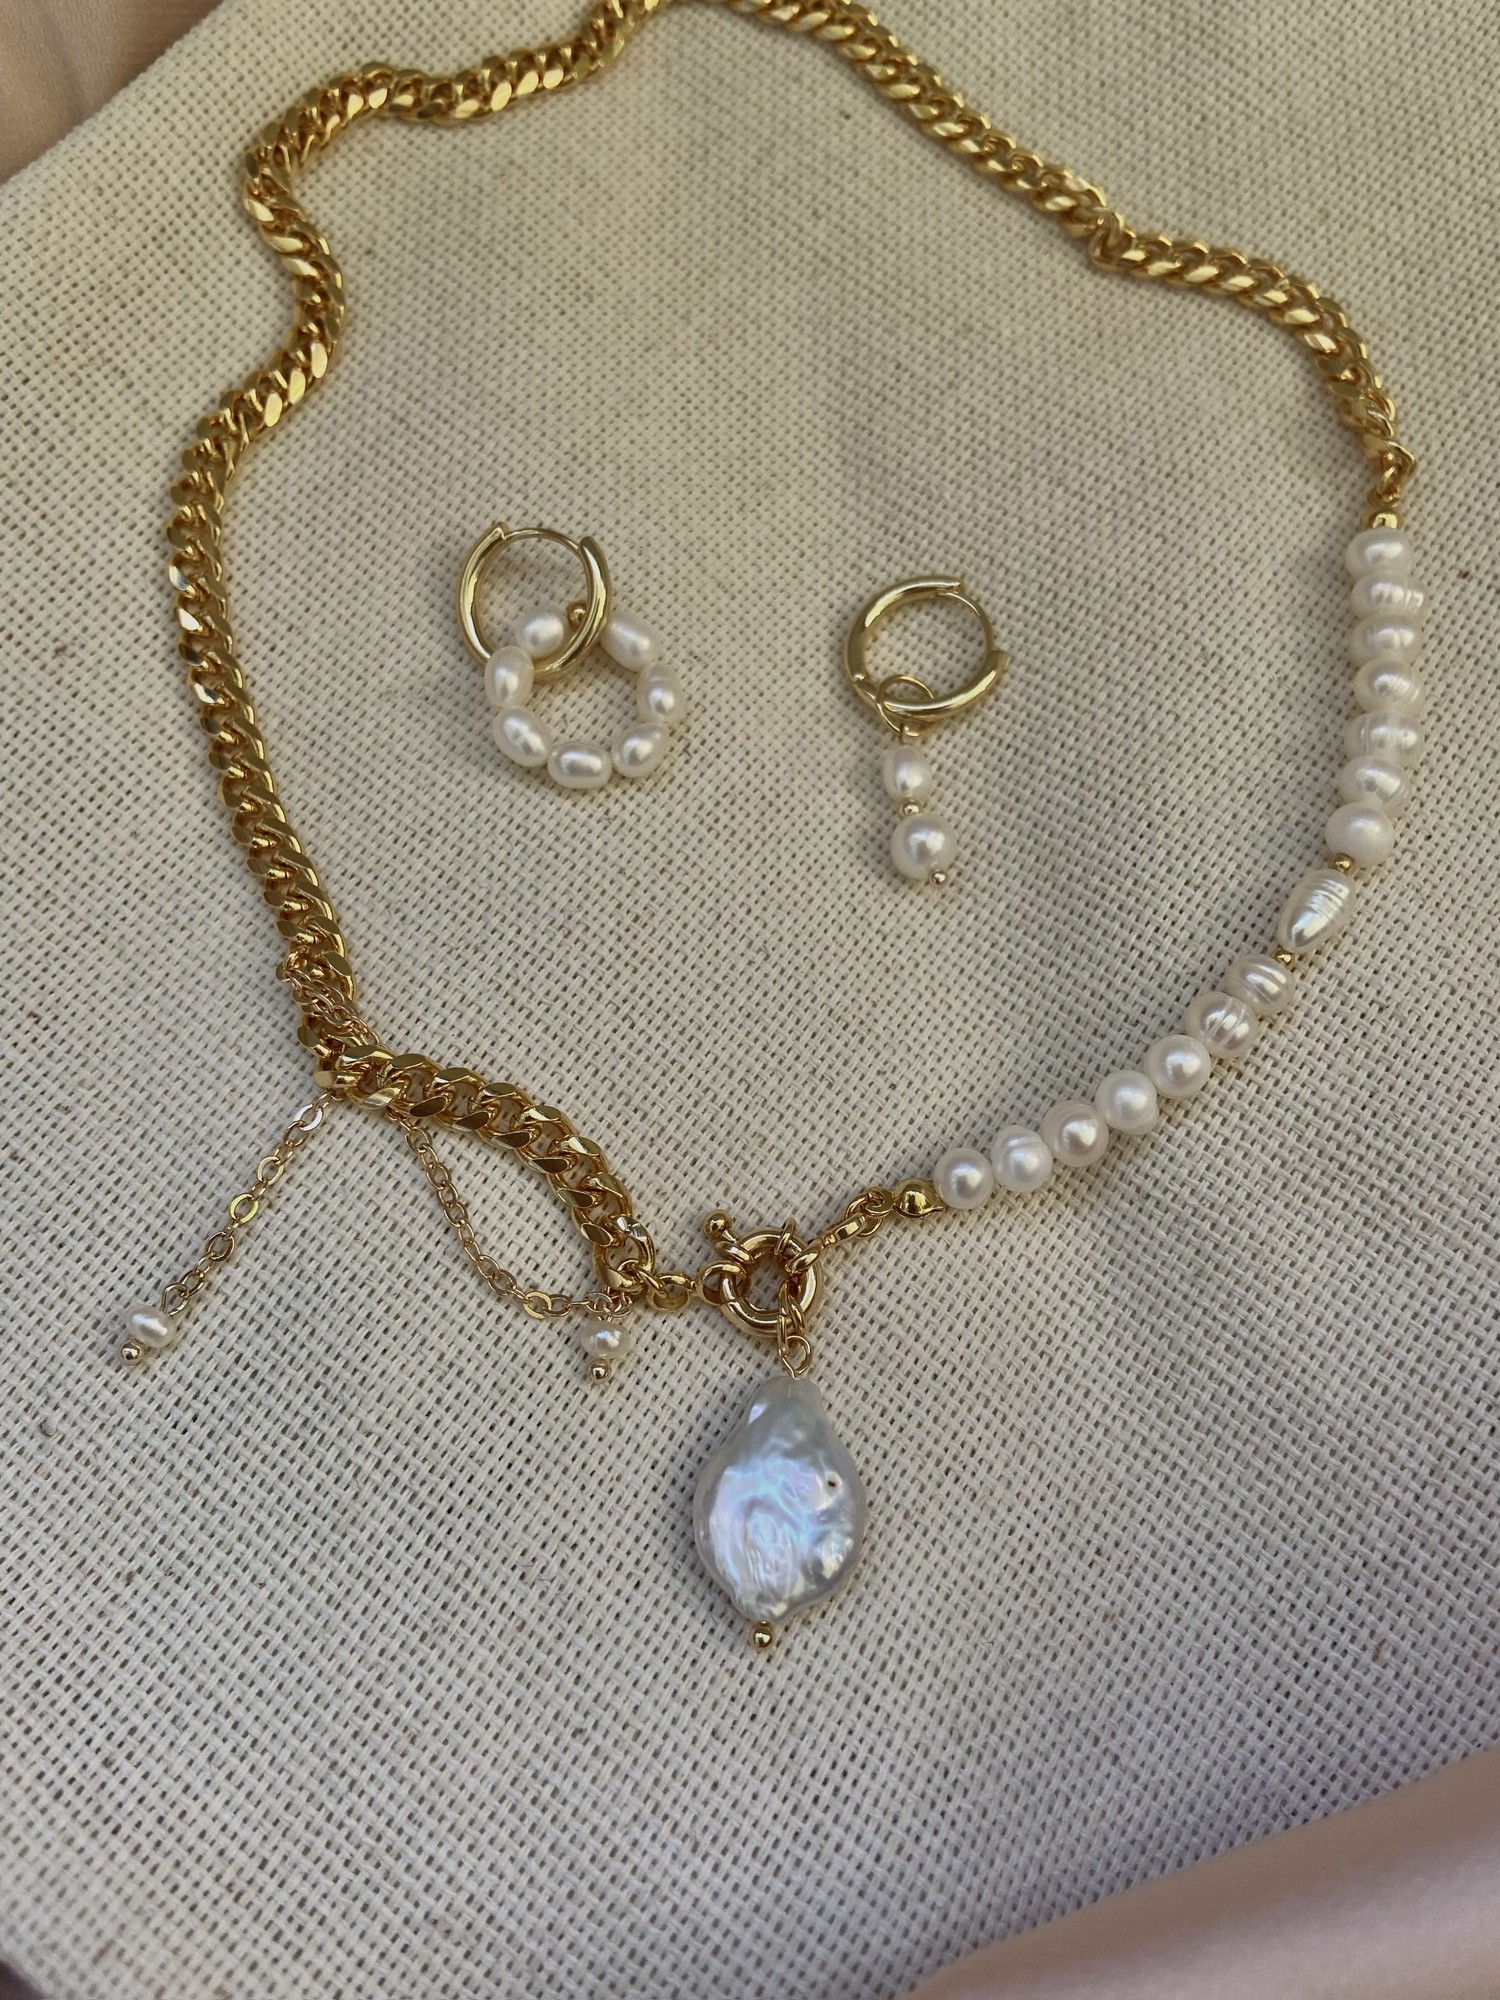 Real pearl necklace with 24k gold